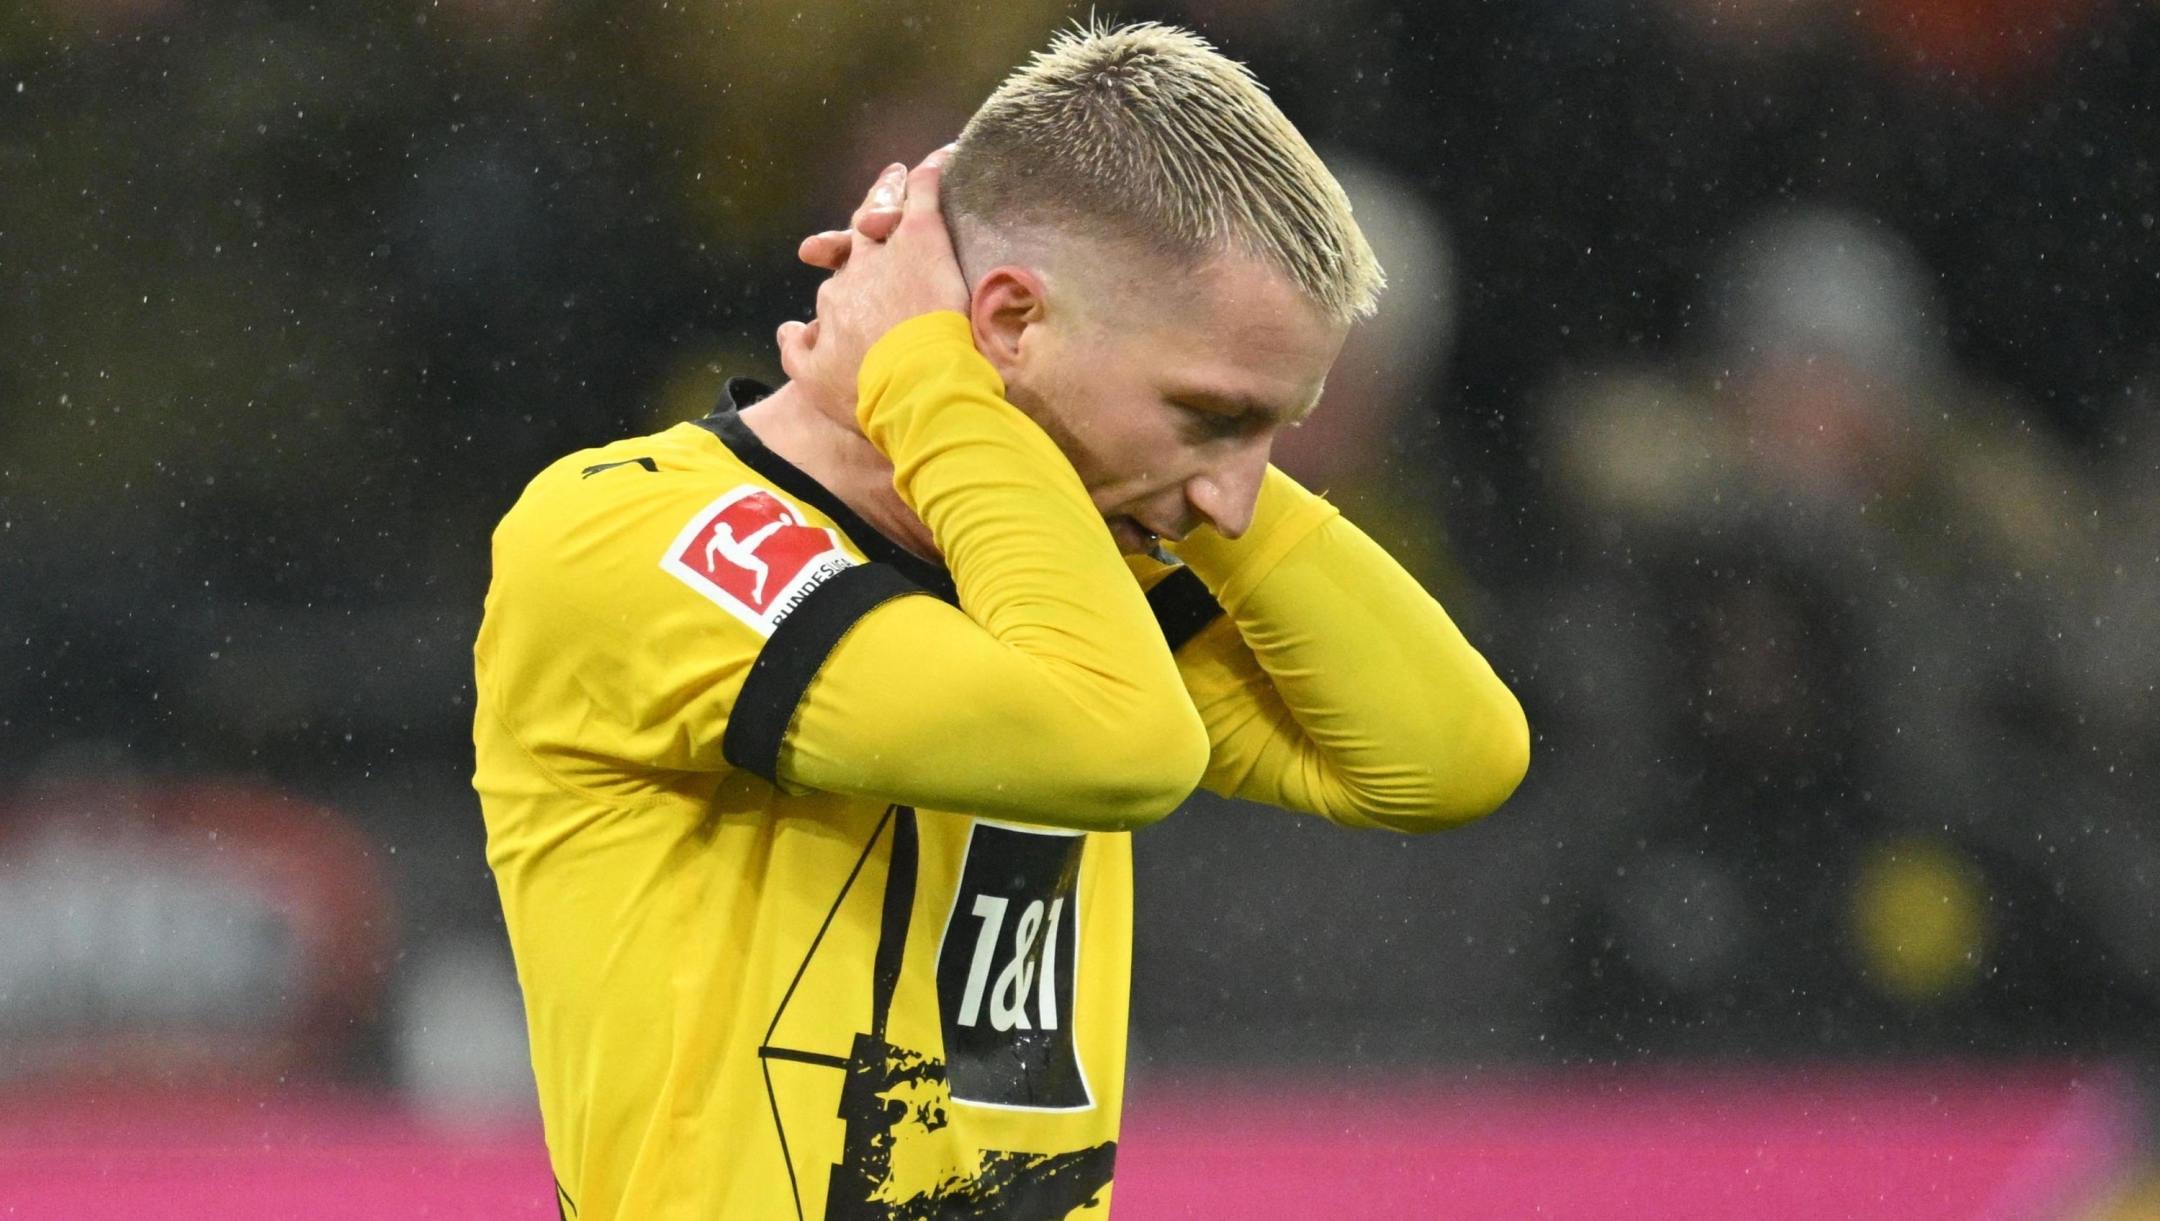 Dortmund's German forward #11 Marco Reus reacts after a missed attempt on goal during the German first division Bundesliga football match between BVB Borussia Dortmund and Borussia Moenchengladbach in Dortmund, western Germany on November 25, 2023. (Photo by INA FASSBENDER / AFP) / DFL REGULATIONS PROHIBIT ANY USE OF PHOTOGRAPHS AS IMAGE SEQUENCES AND/OR QUASI-VIDEO